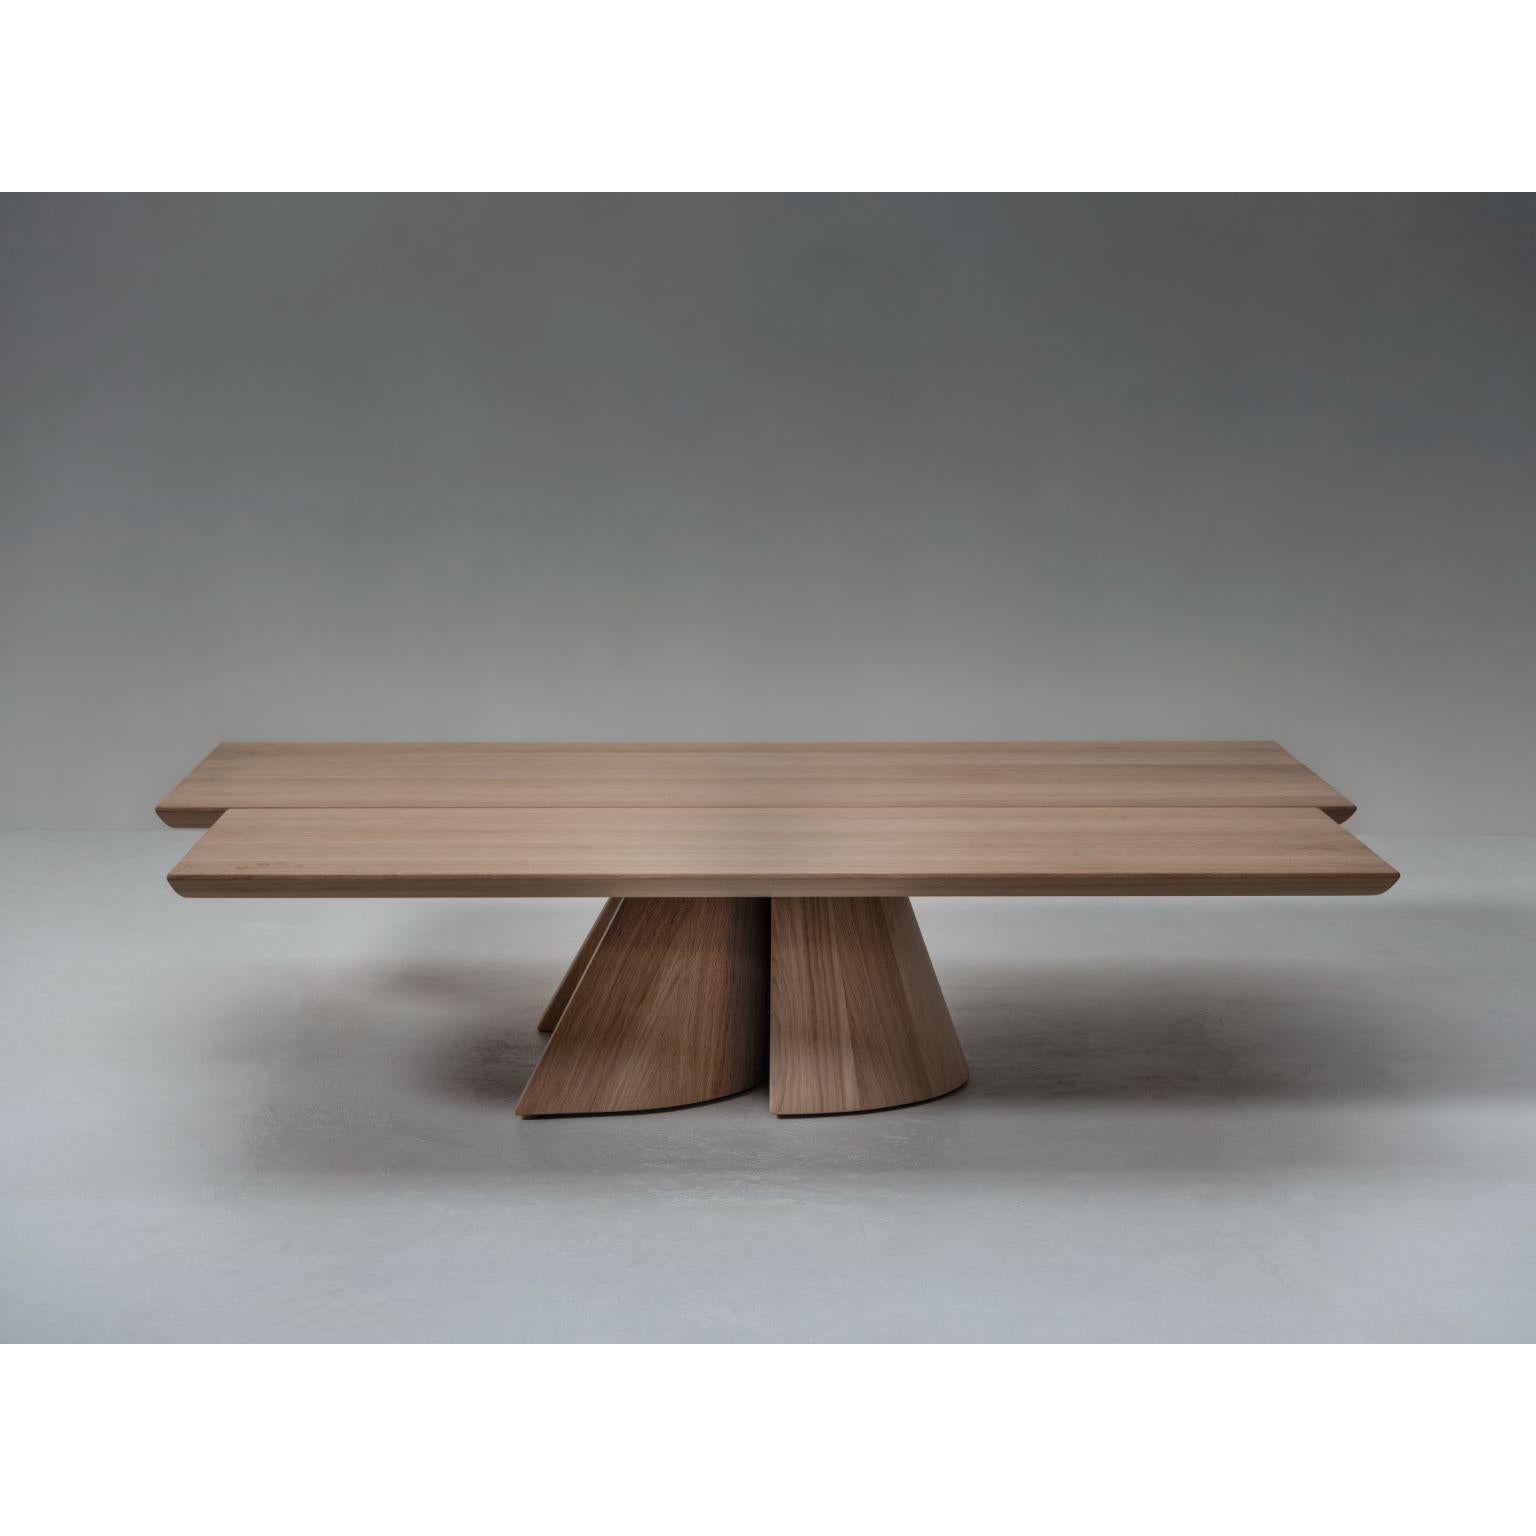 Got Coffee Table by Van Rossum
Dimensions: D150 x W120 x H33cm
Materials: Oak Nude

A solid coffee table featuring a delicately crafted tabletop with a semi-oval base, supported by a striking base of asymmetrical crescent legs that interlock in a